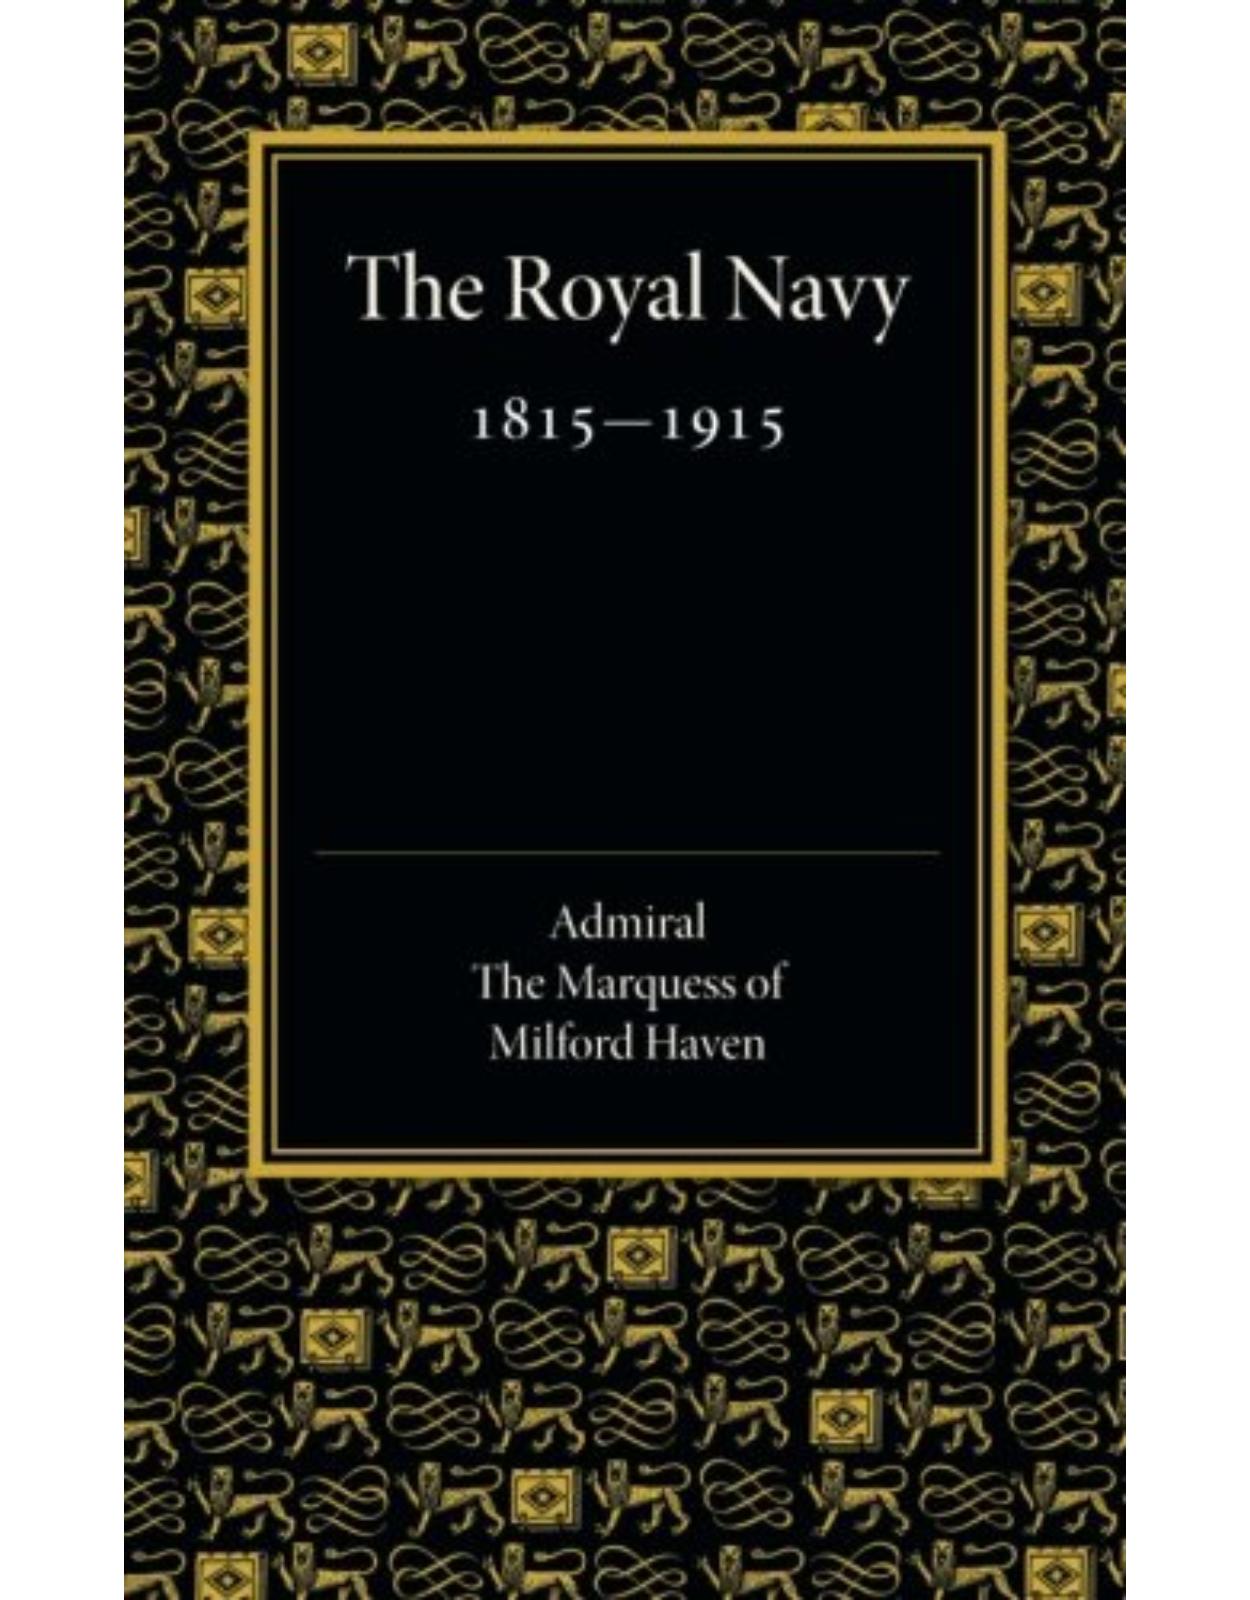 Royal Navy 1815-1915: The Rede Lecture 1918